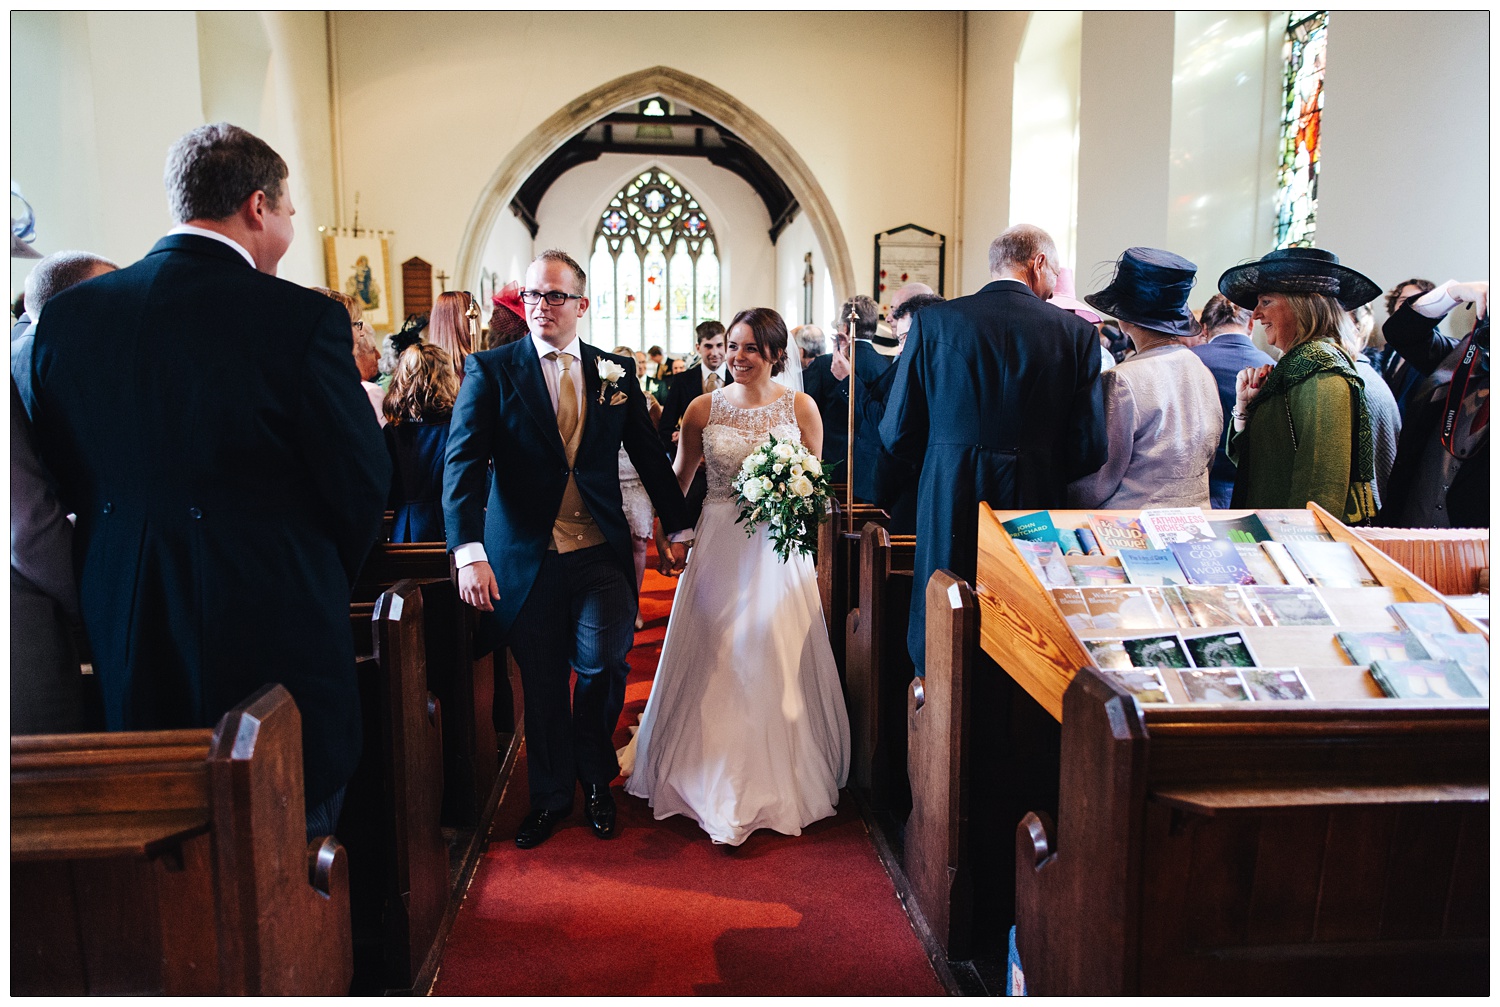 Just married and walking down the aisle of an Essex church